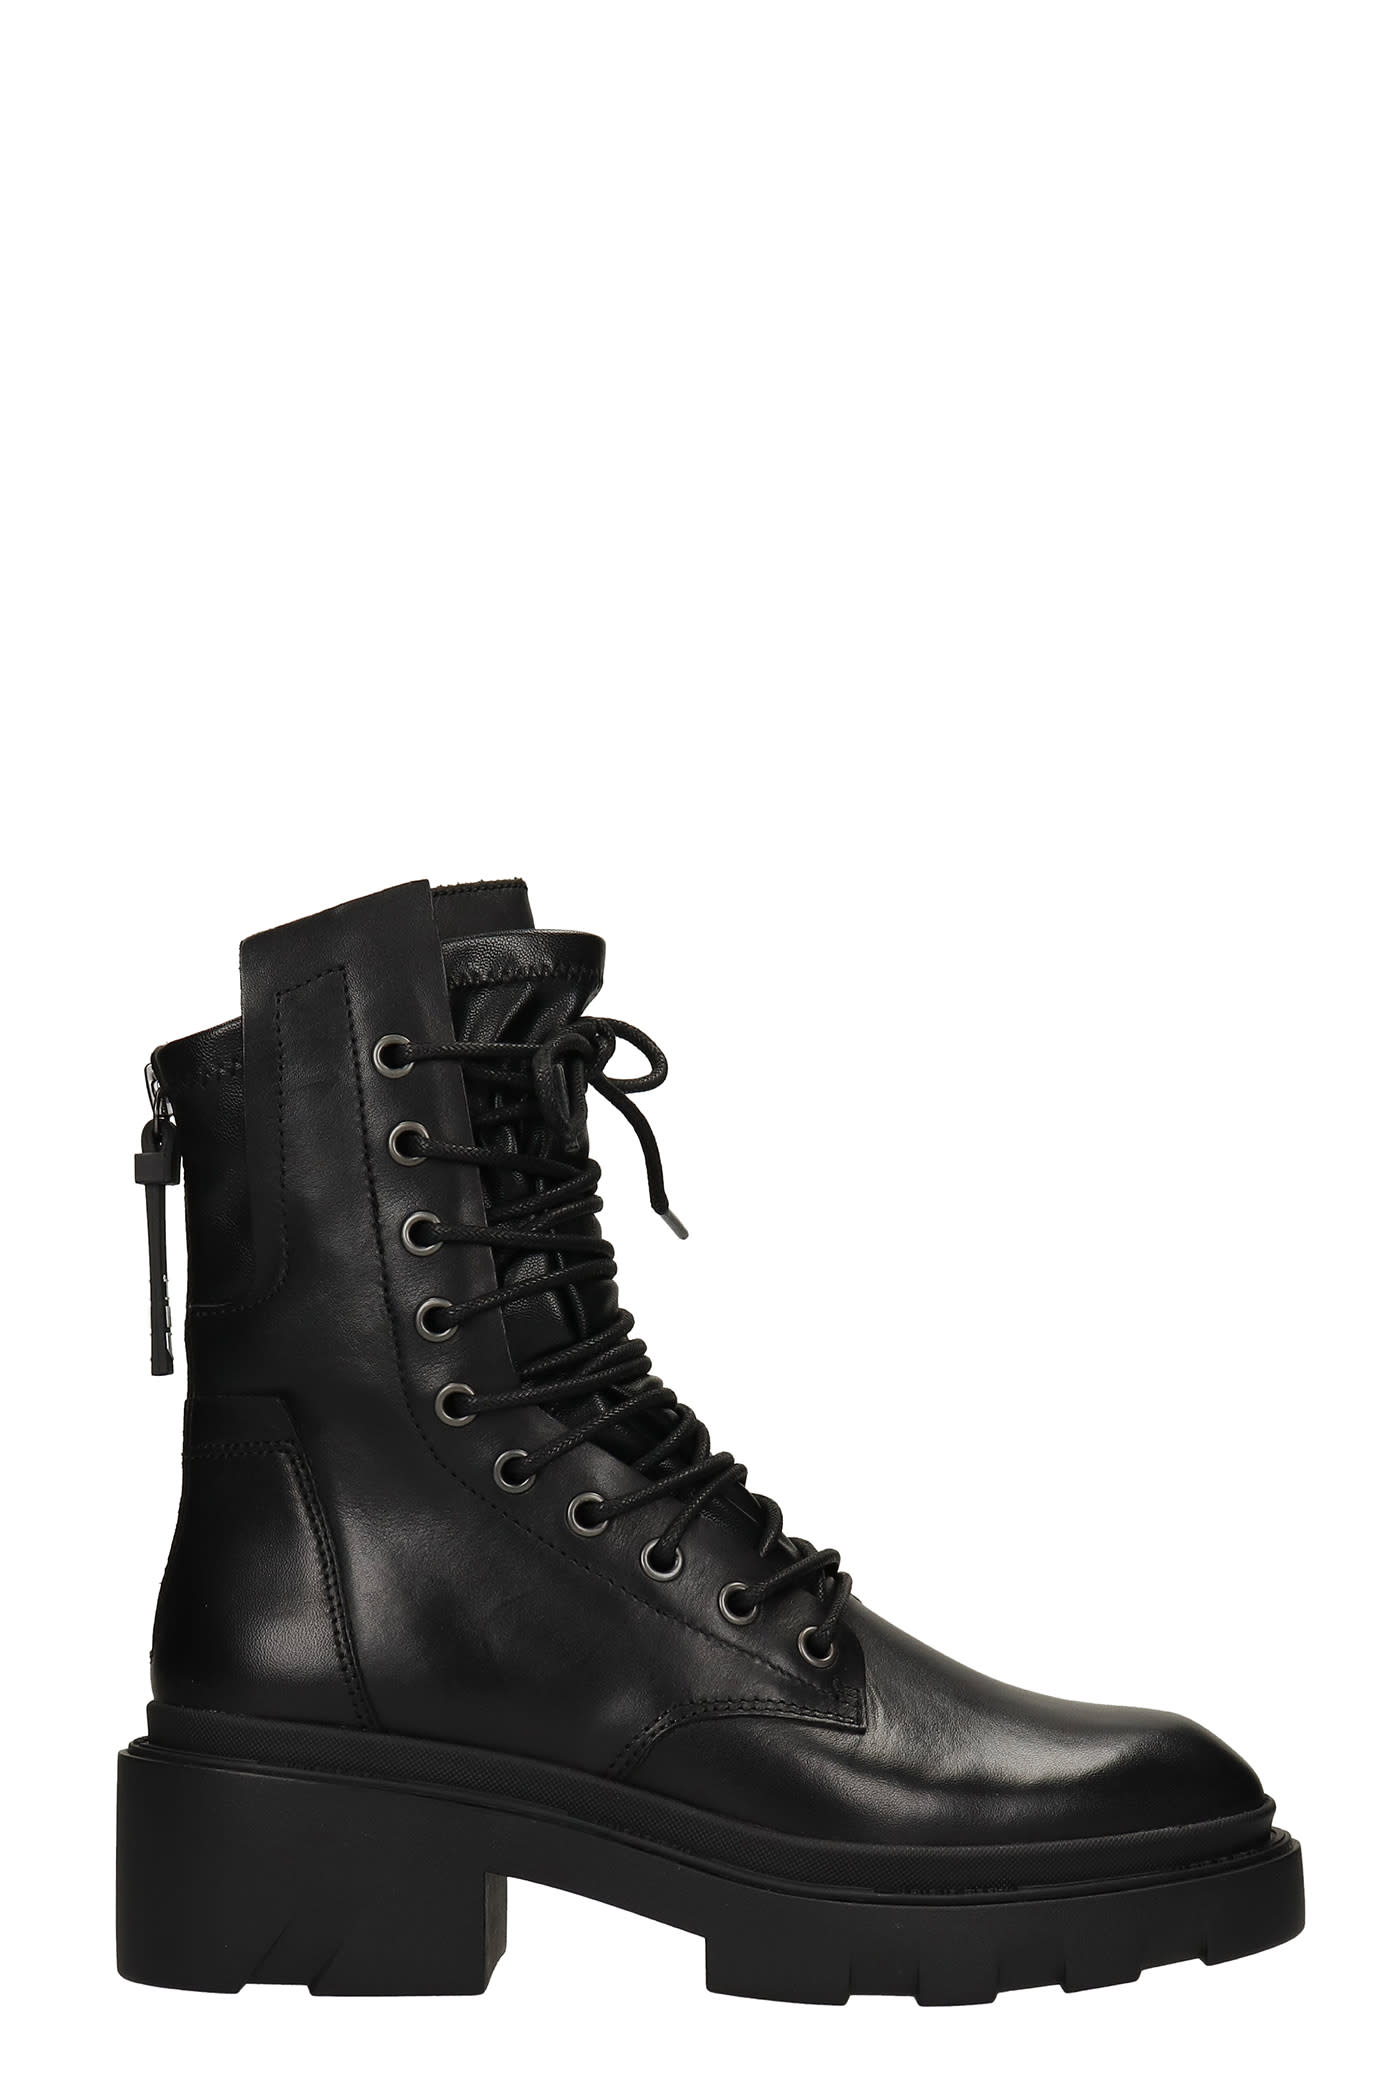 Ash Madness Combat Boots In Black Leather